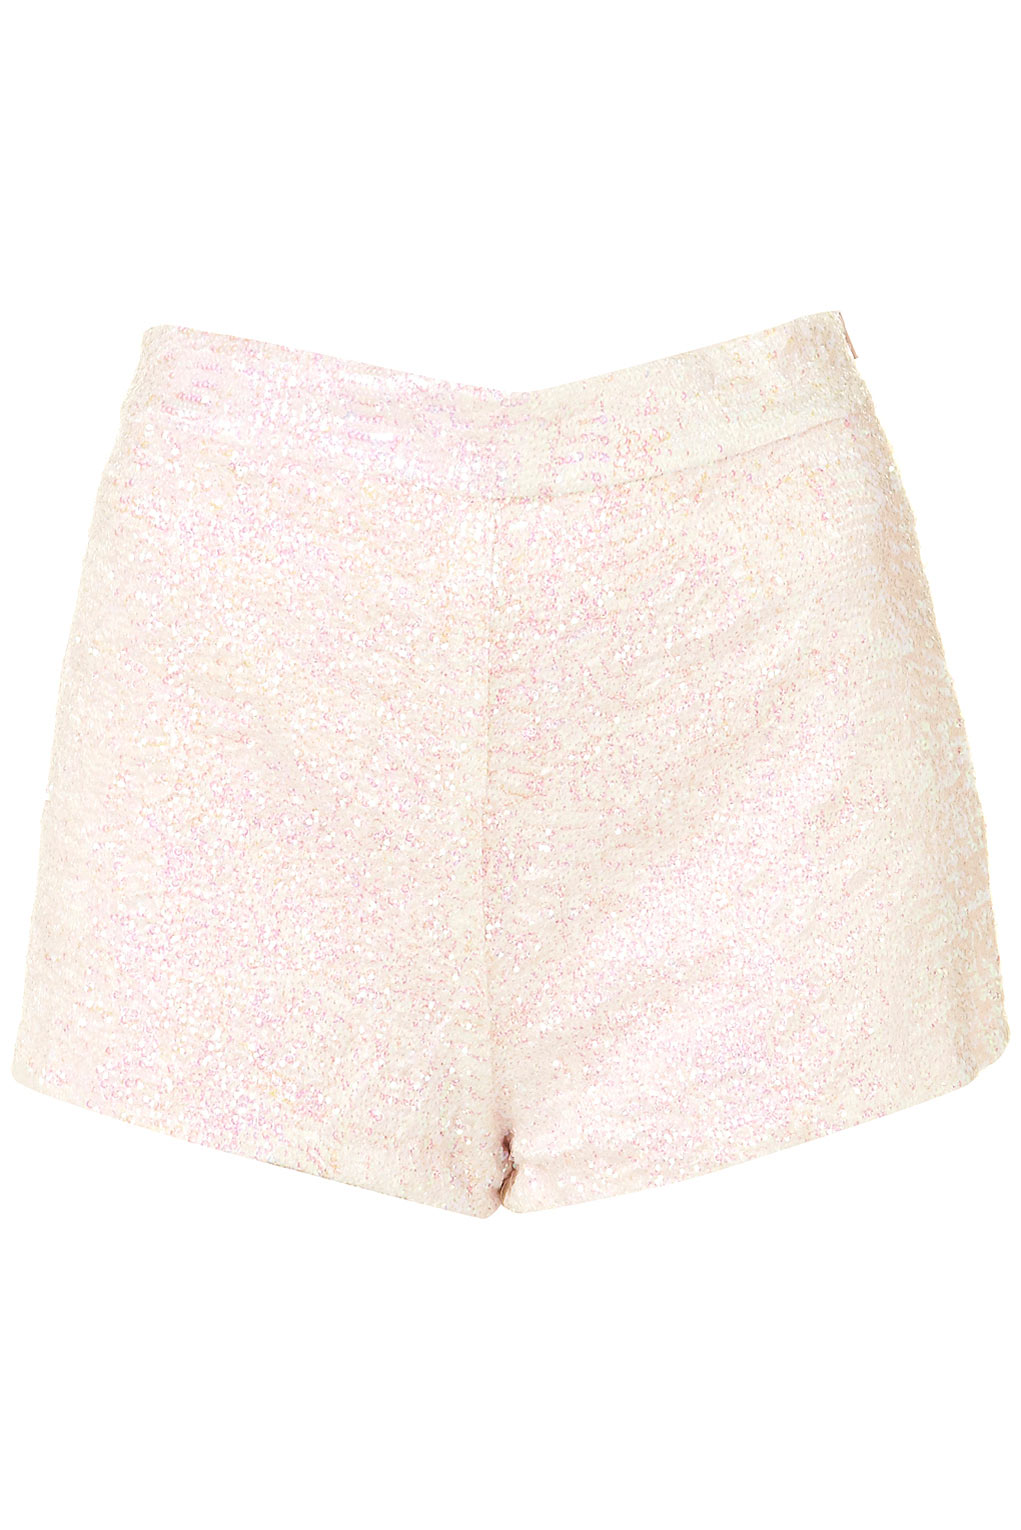 Topshop Sequin Knicker Shorts in White | Lyst